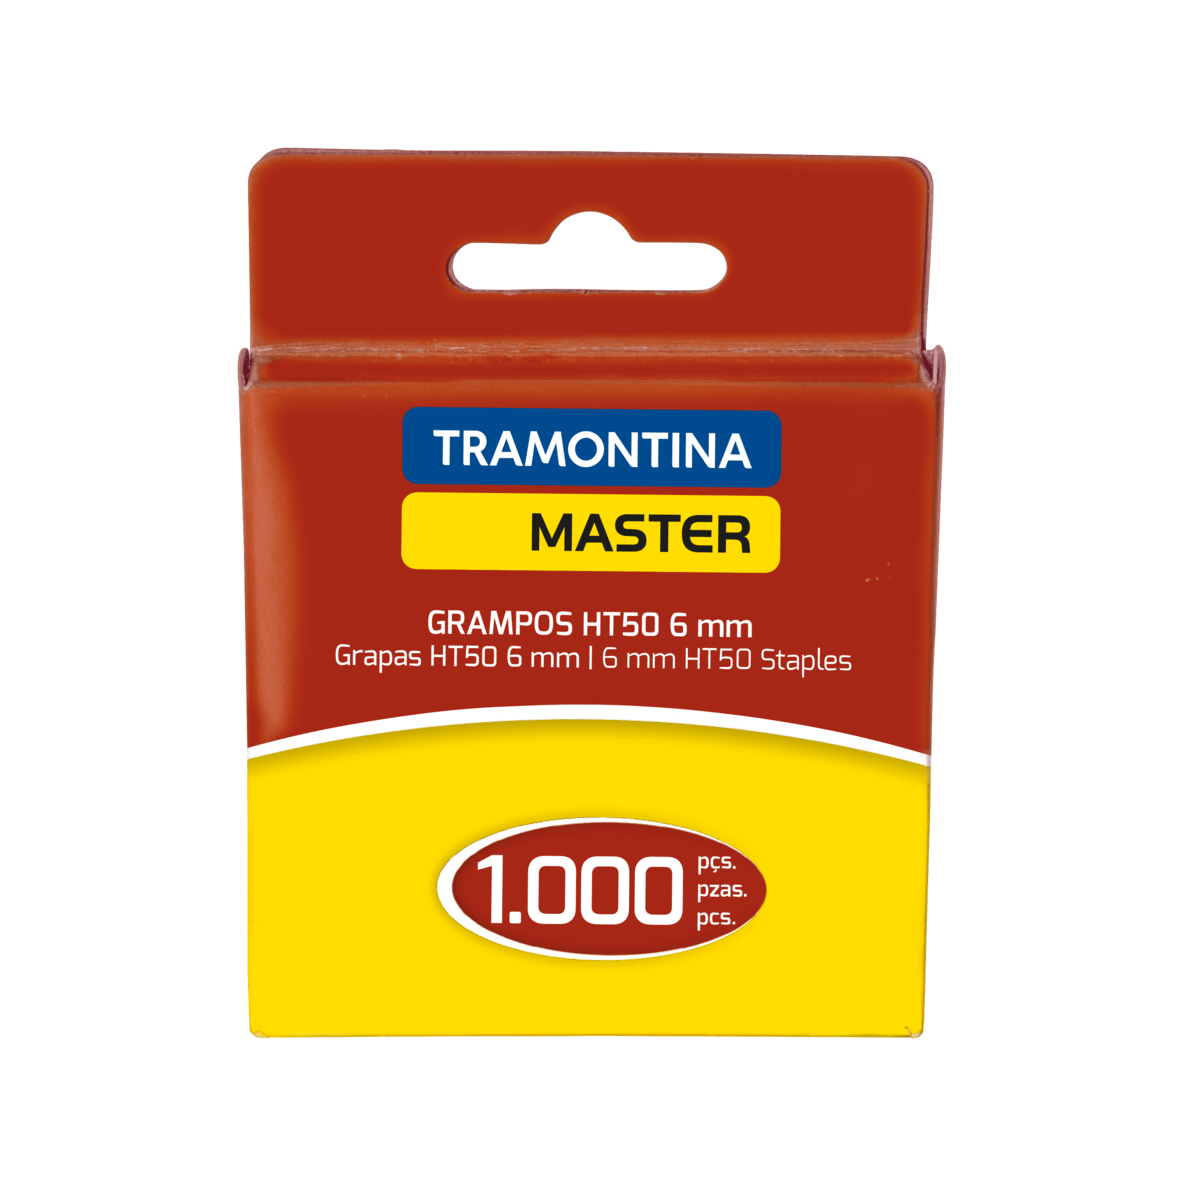 Tramontina T/50 Staple Pin Set- 1000 pieces | Supply Master | Accra, Ghana Tools Building Steel Engineering Hardware tool